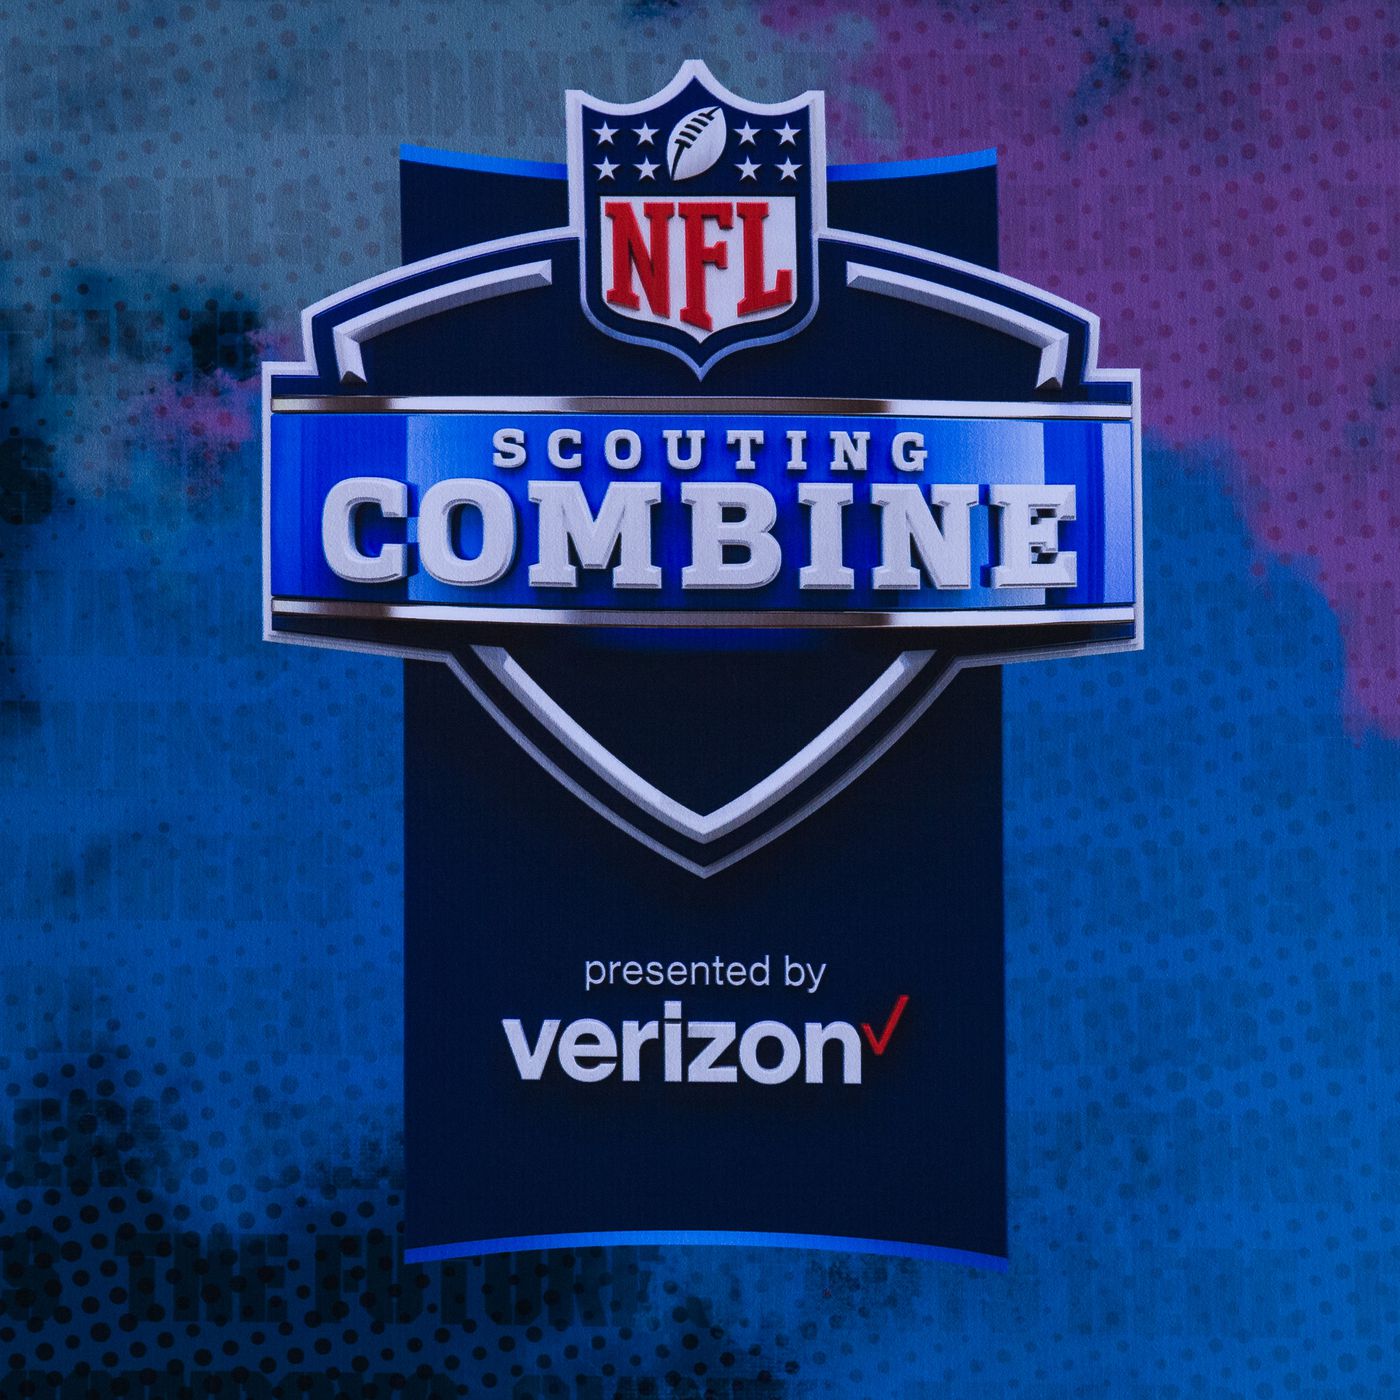 NFL Scouting Combine: Can fans attend the 2022 pre-draft event? -  DraftKings Network